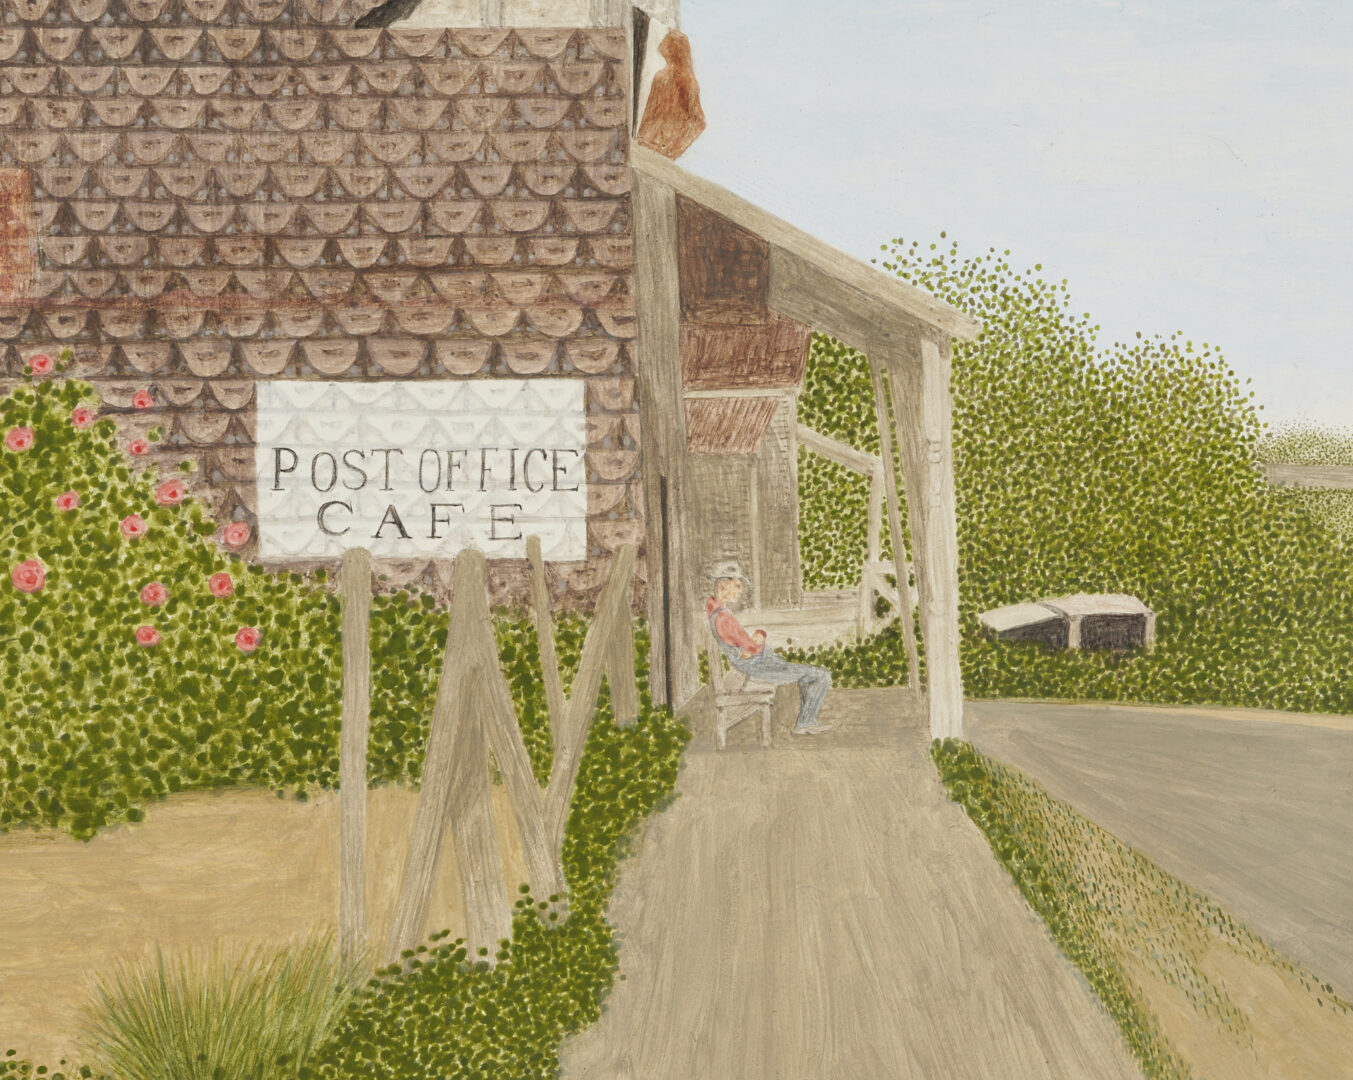 Lot 154: Carroll Cloar Painting, Post Office Cafe, 1975